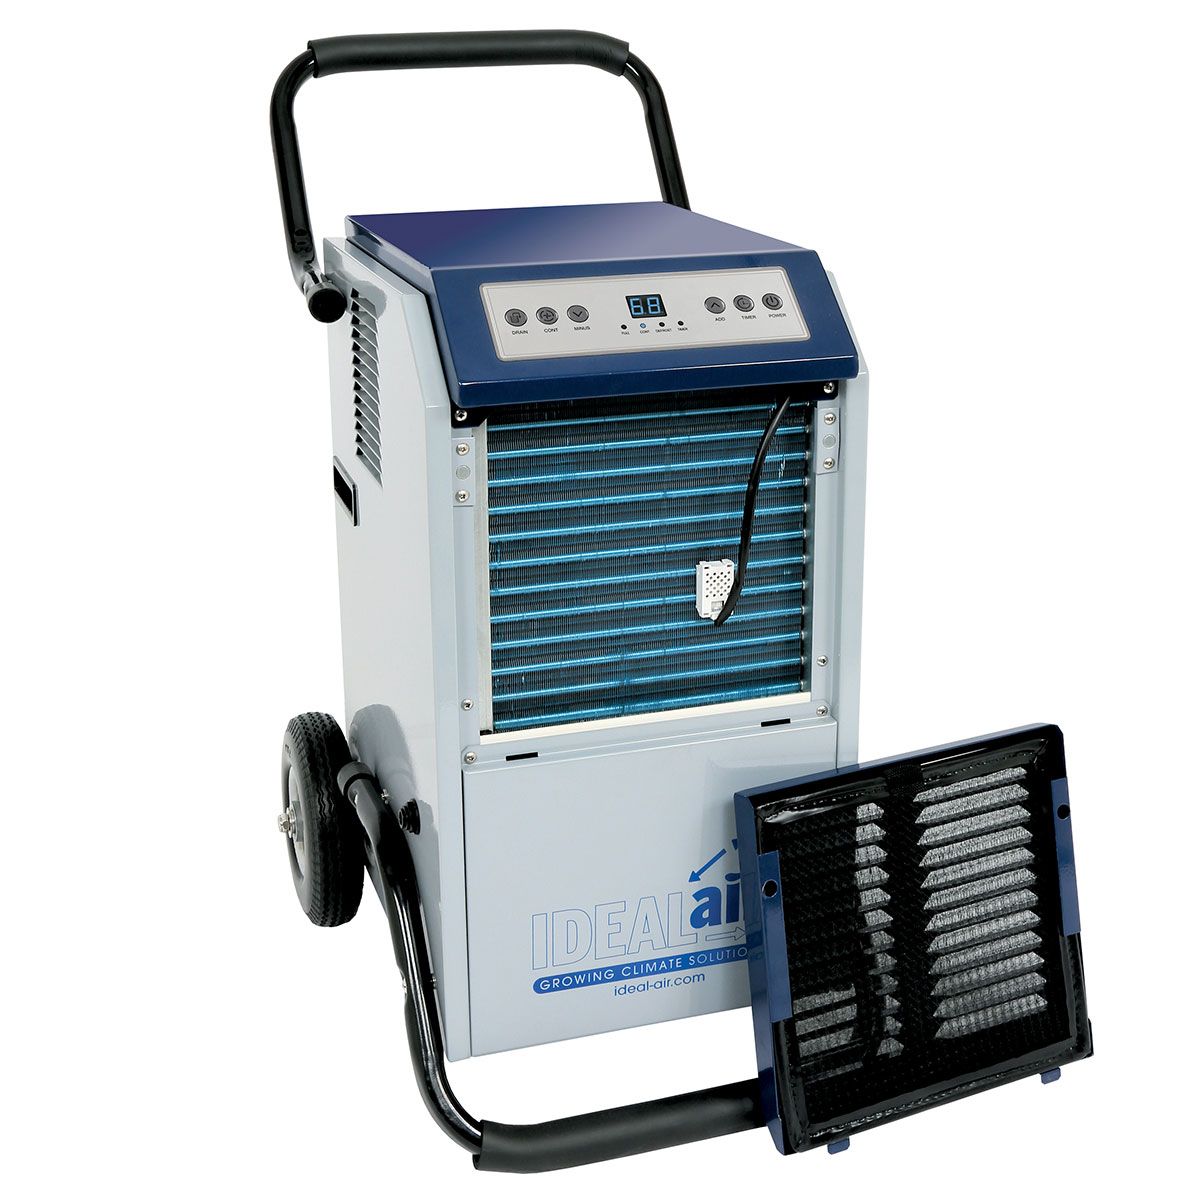 Product Secondary Image:Ideal-Air Pro Series Dehumidifier